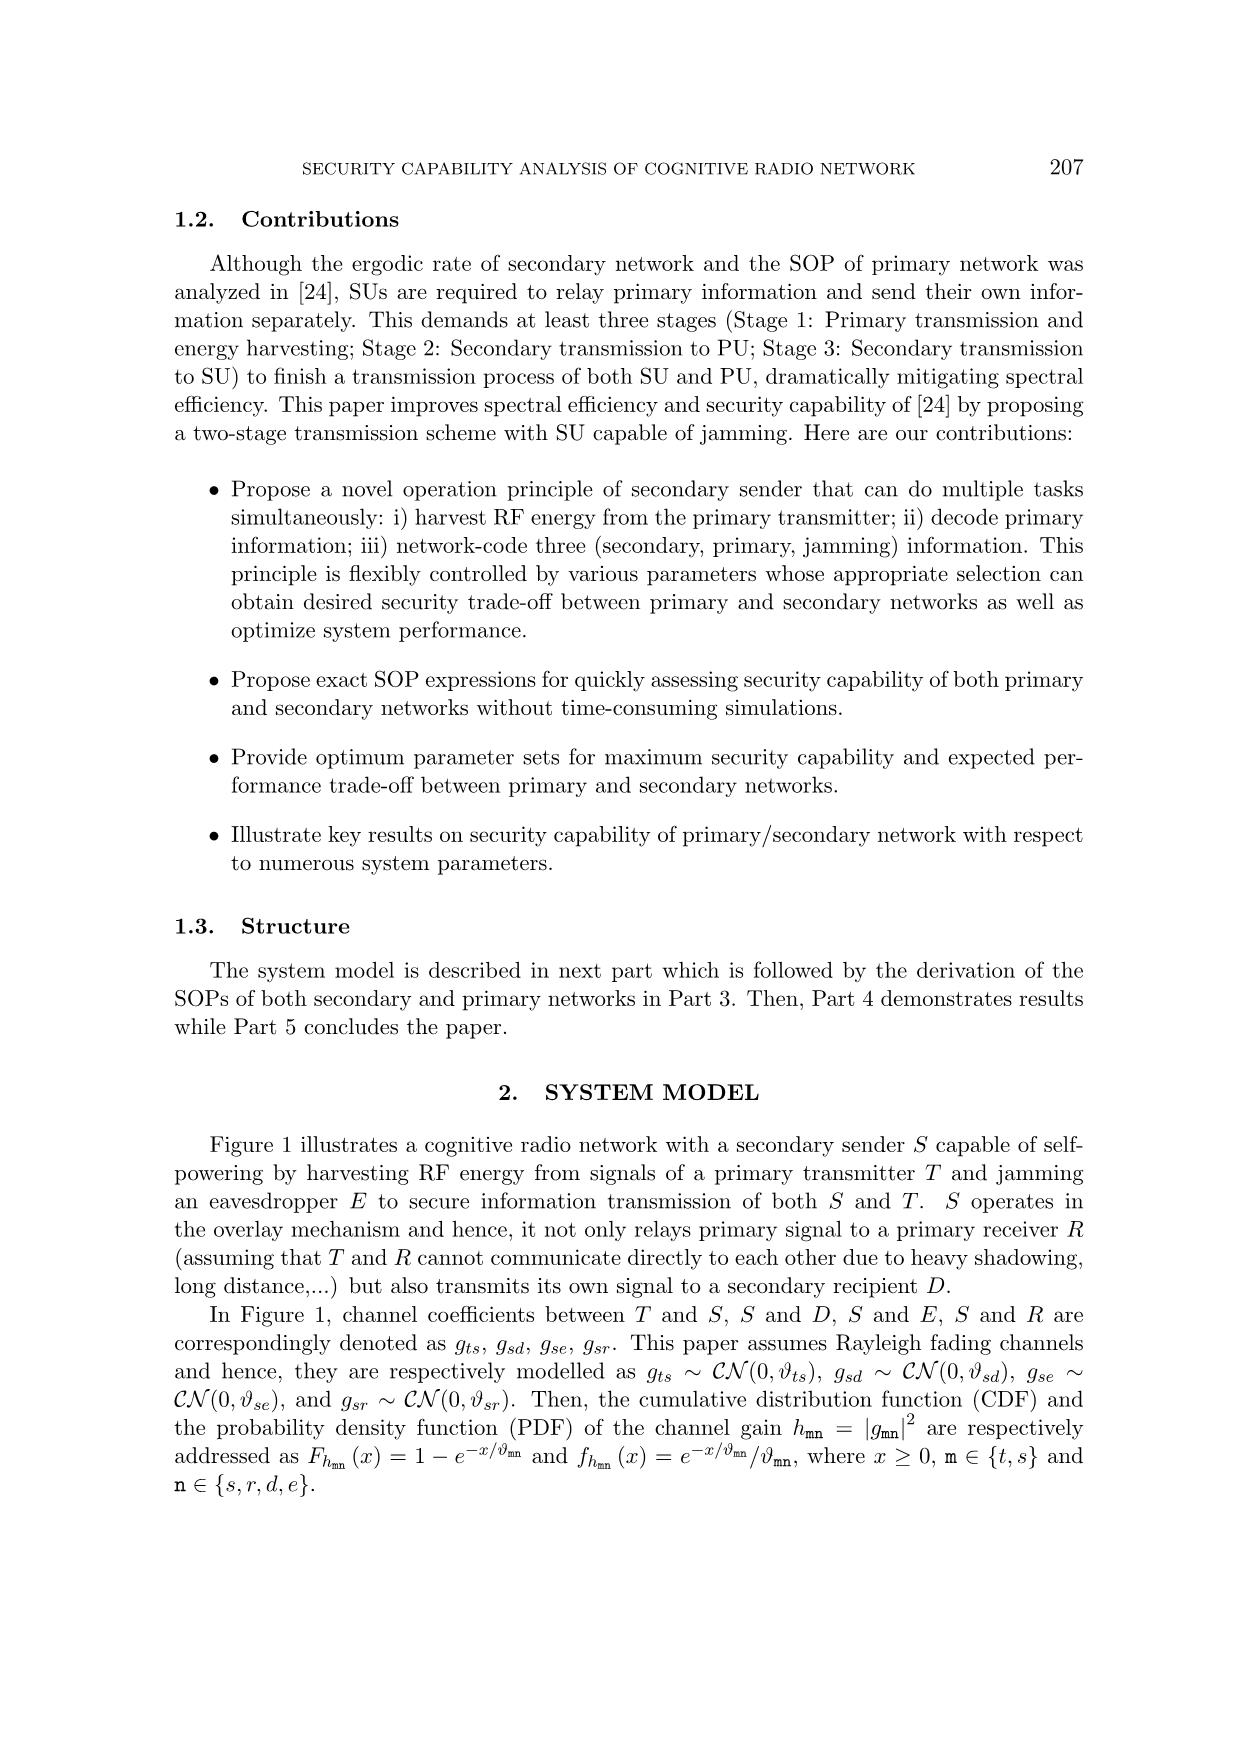 Security capability analysis of cognitive radio network with secondary user capable of jamming and self-powering trang 3